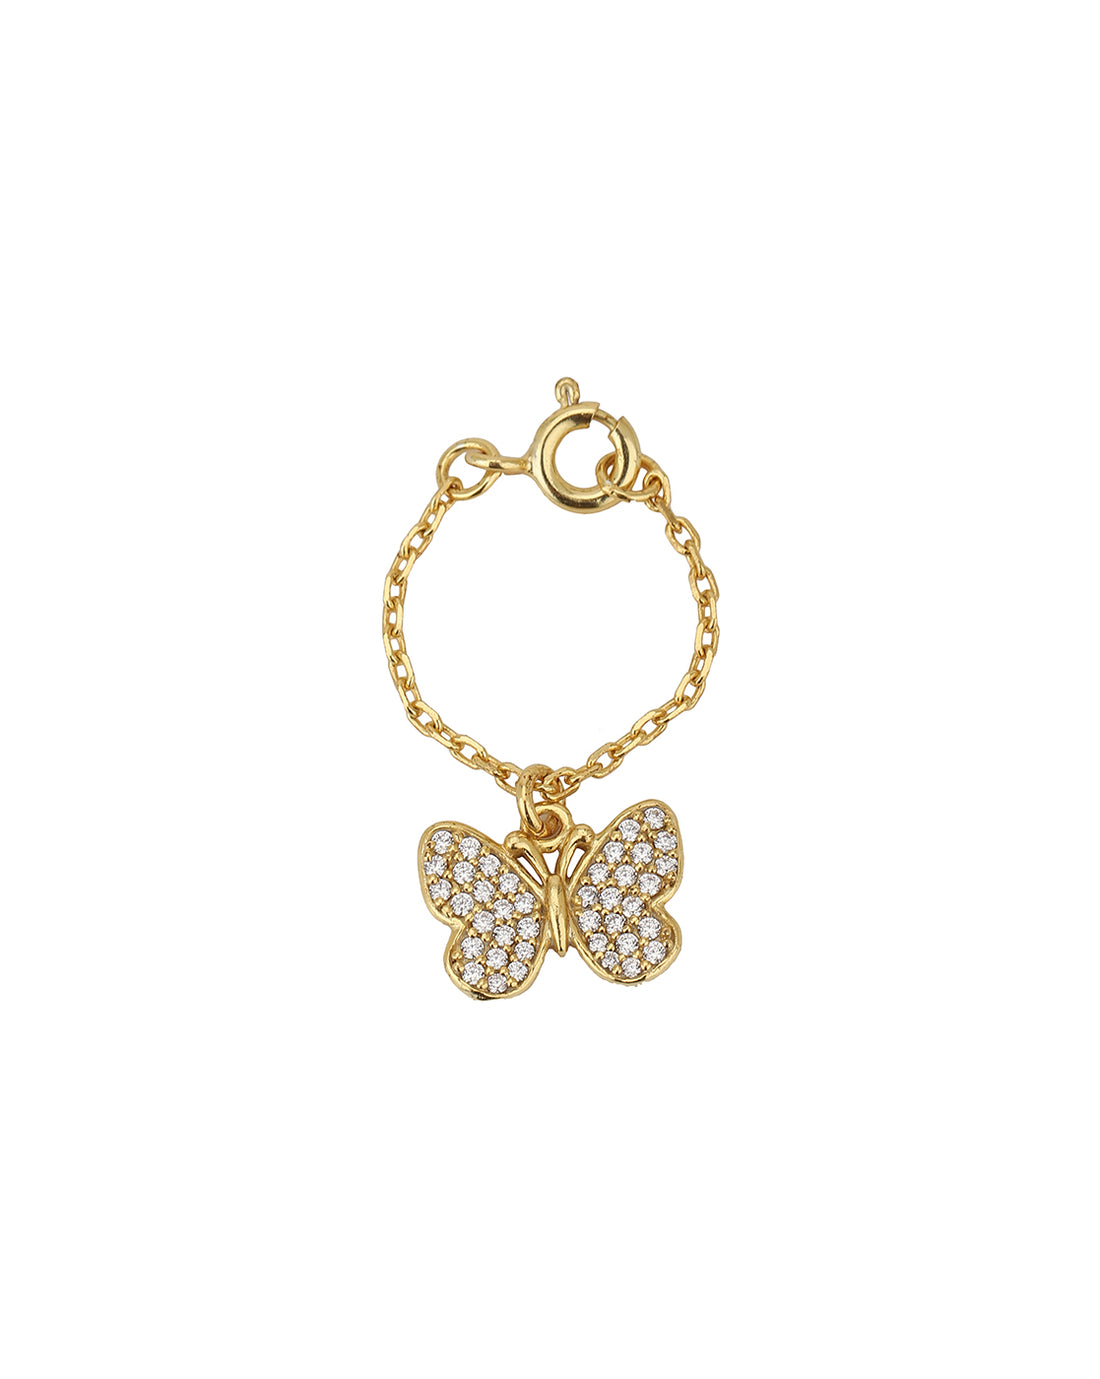 Carlton London Gold Plated Cz Studded Butterfly Shape Watch Charm For Women